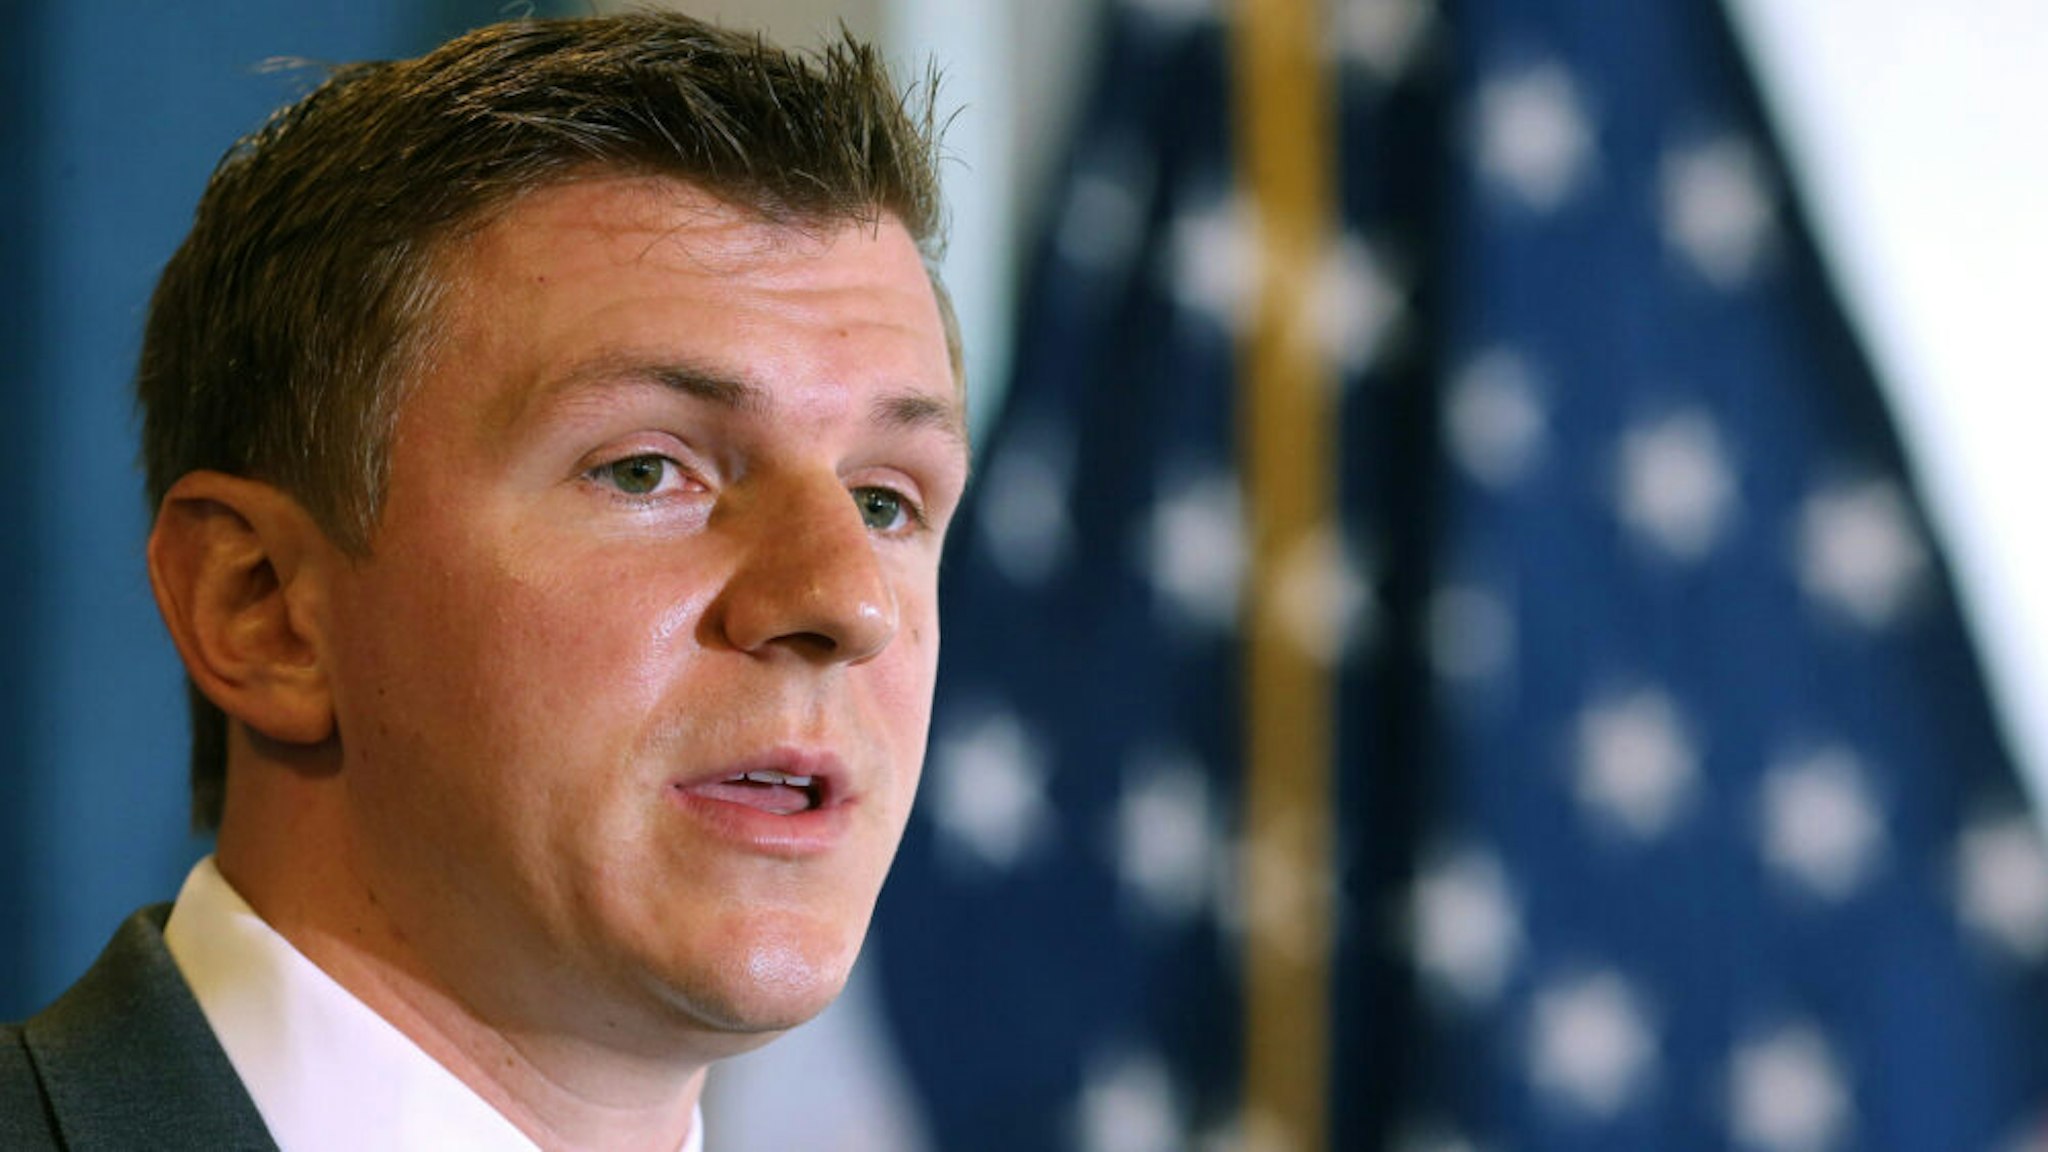 WASHINGTON, DC - SEPTEMBER 01: Conservative undercover journalist James O'Keefe (R) holds a news conference at the National Press Club September 1, 2015 in Washington, DC. O'Keefe released a video of that accuses the Democratic frontrunner Hillary Clinton's director of marketing and FEC compliance director of breaking the law by allowing a Canadian tourist to buy $75 of campaign swag using the Project Veritas Action journalist as a straw purchaser. O'Keefe promised that people will resign from their jobs as his "Army of Exposers" record and release more undercover videos during the 2016 campaign.